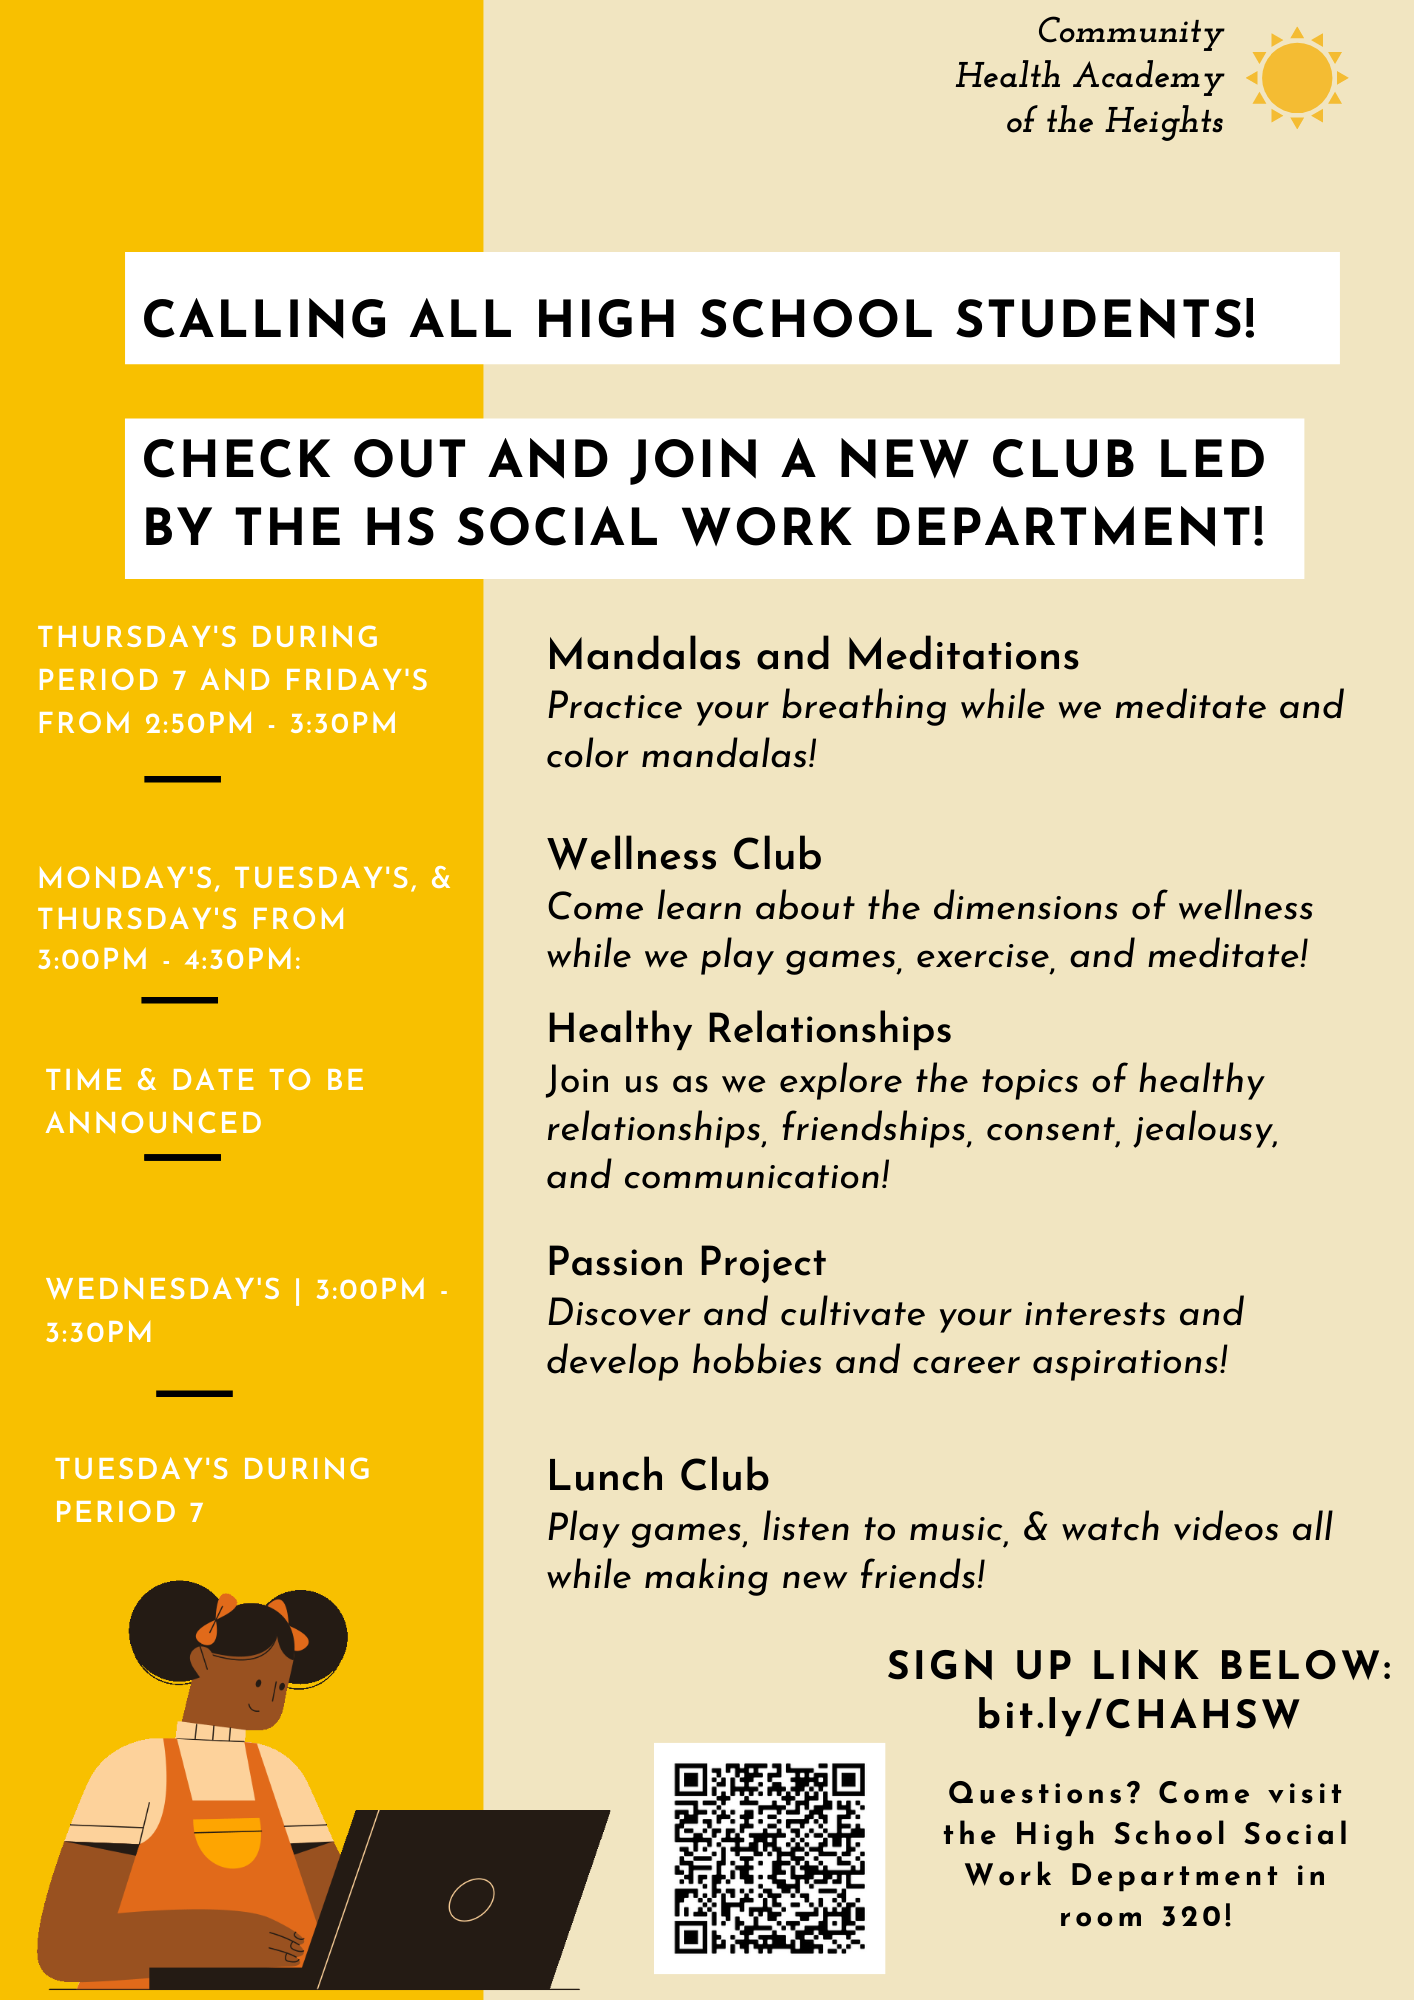 Social Work Clubs! — The Community Health Academy of the Heights